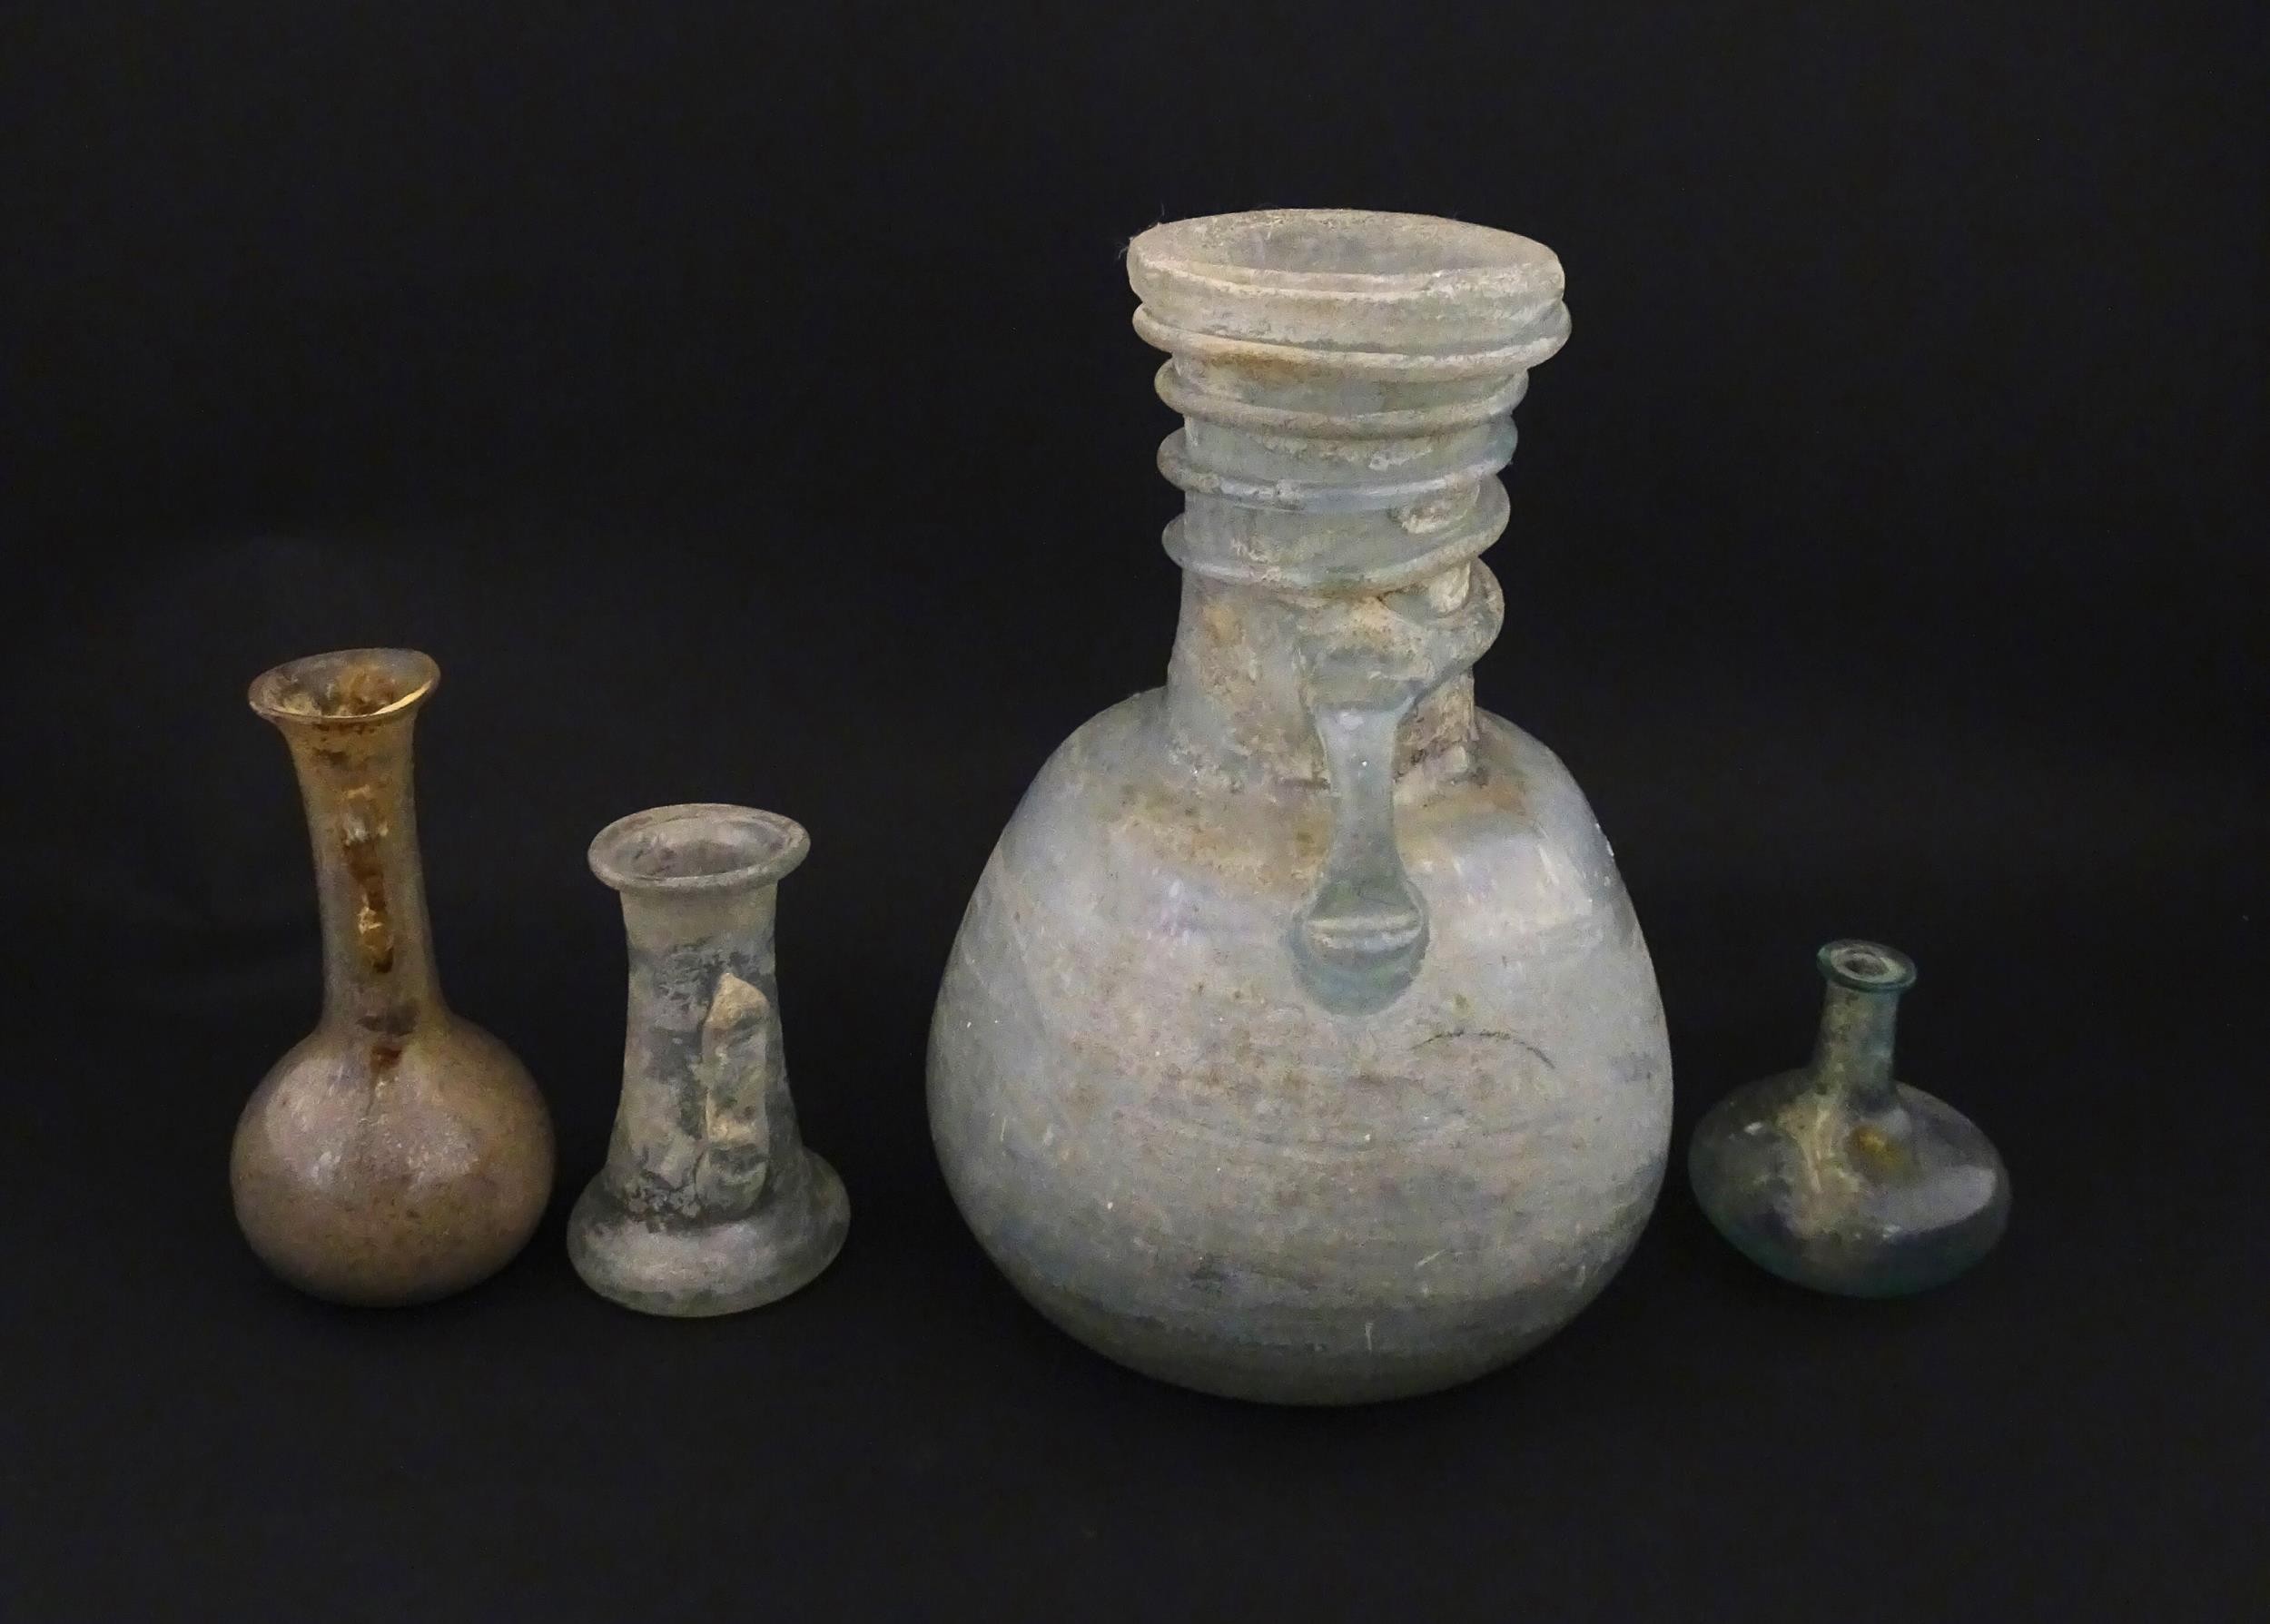 Four glass vases in the Roman style with iridescent finish, some with trail detail. Largest - Image 5 of 6